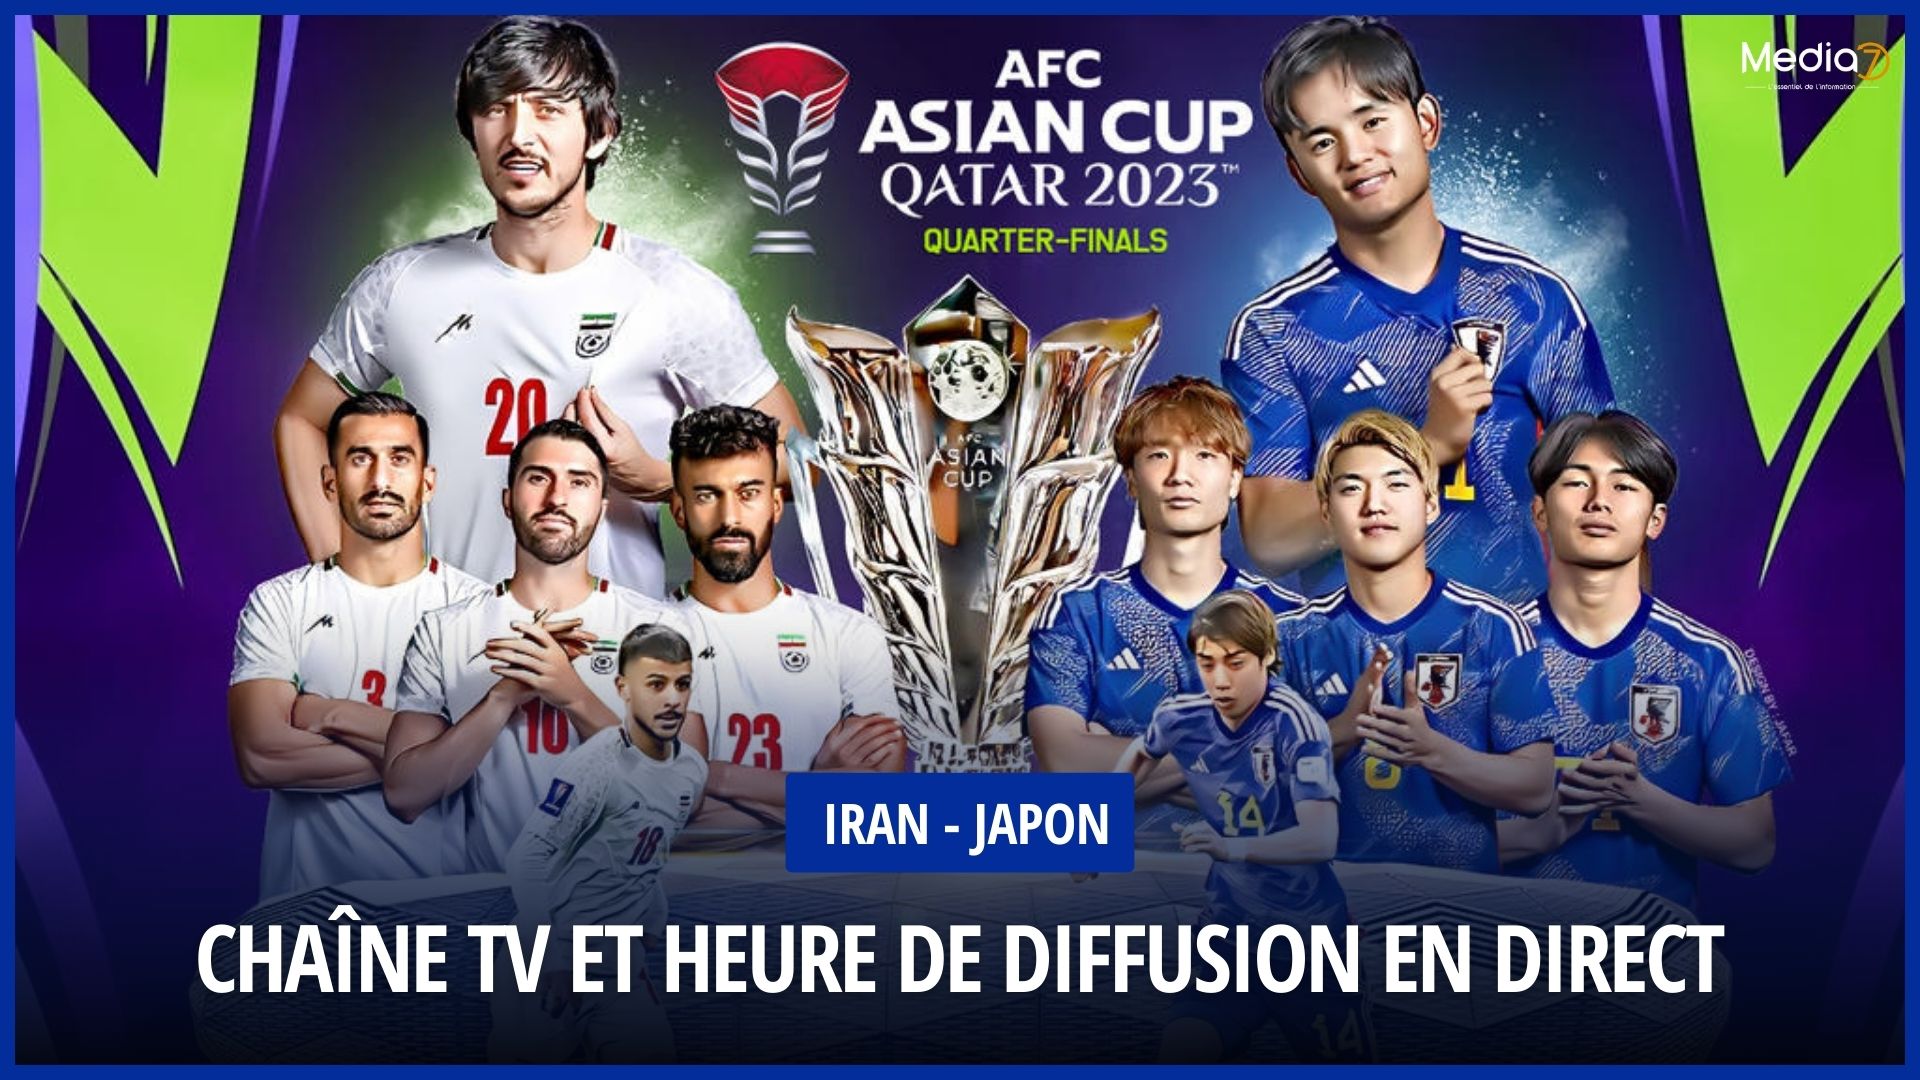 Follow the Iran - Japan Match Live: TV Channel and Broadcast Schedule - Media7